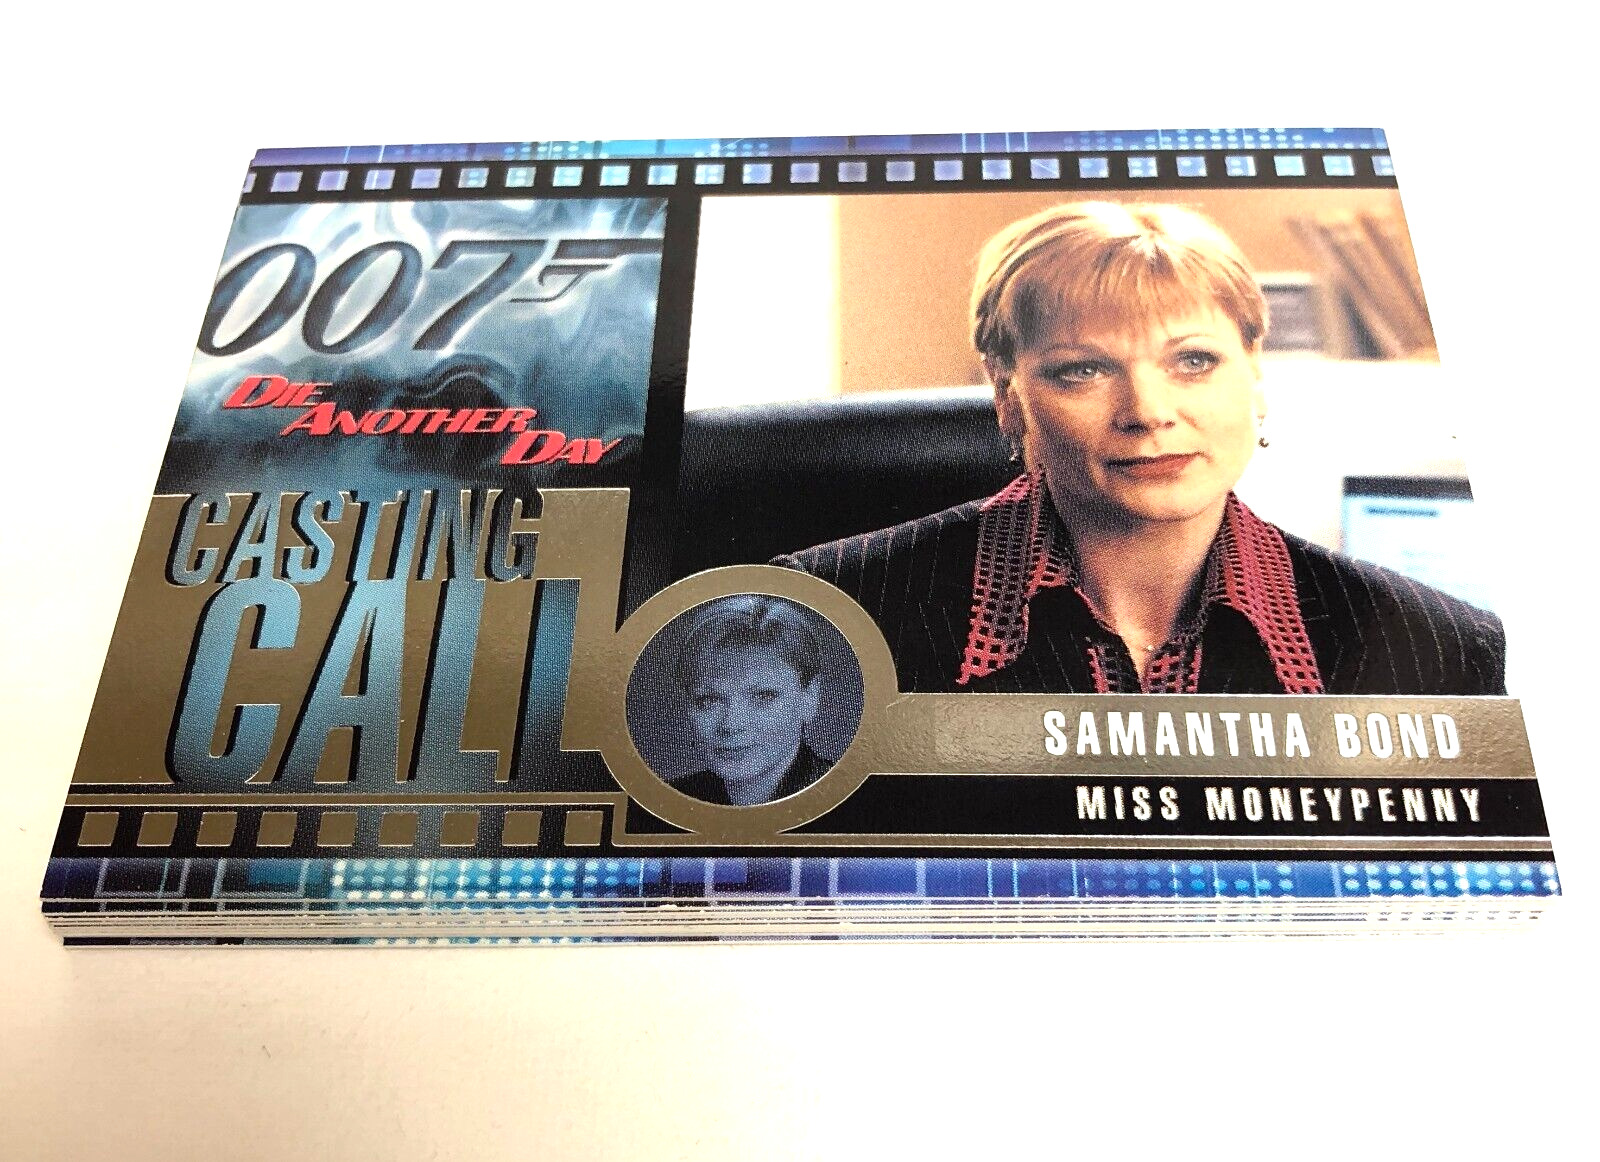 2002 James Bond: Die Another Day Casting Call Complete Set C1-C12 Rittenhouse